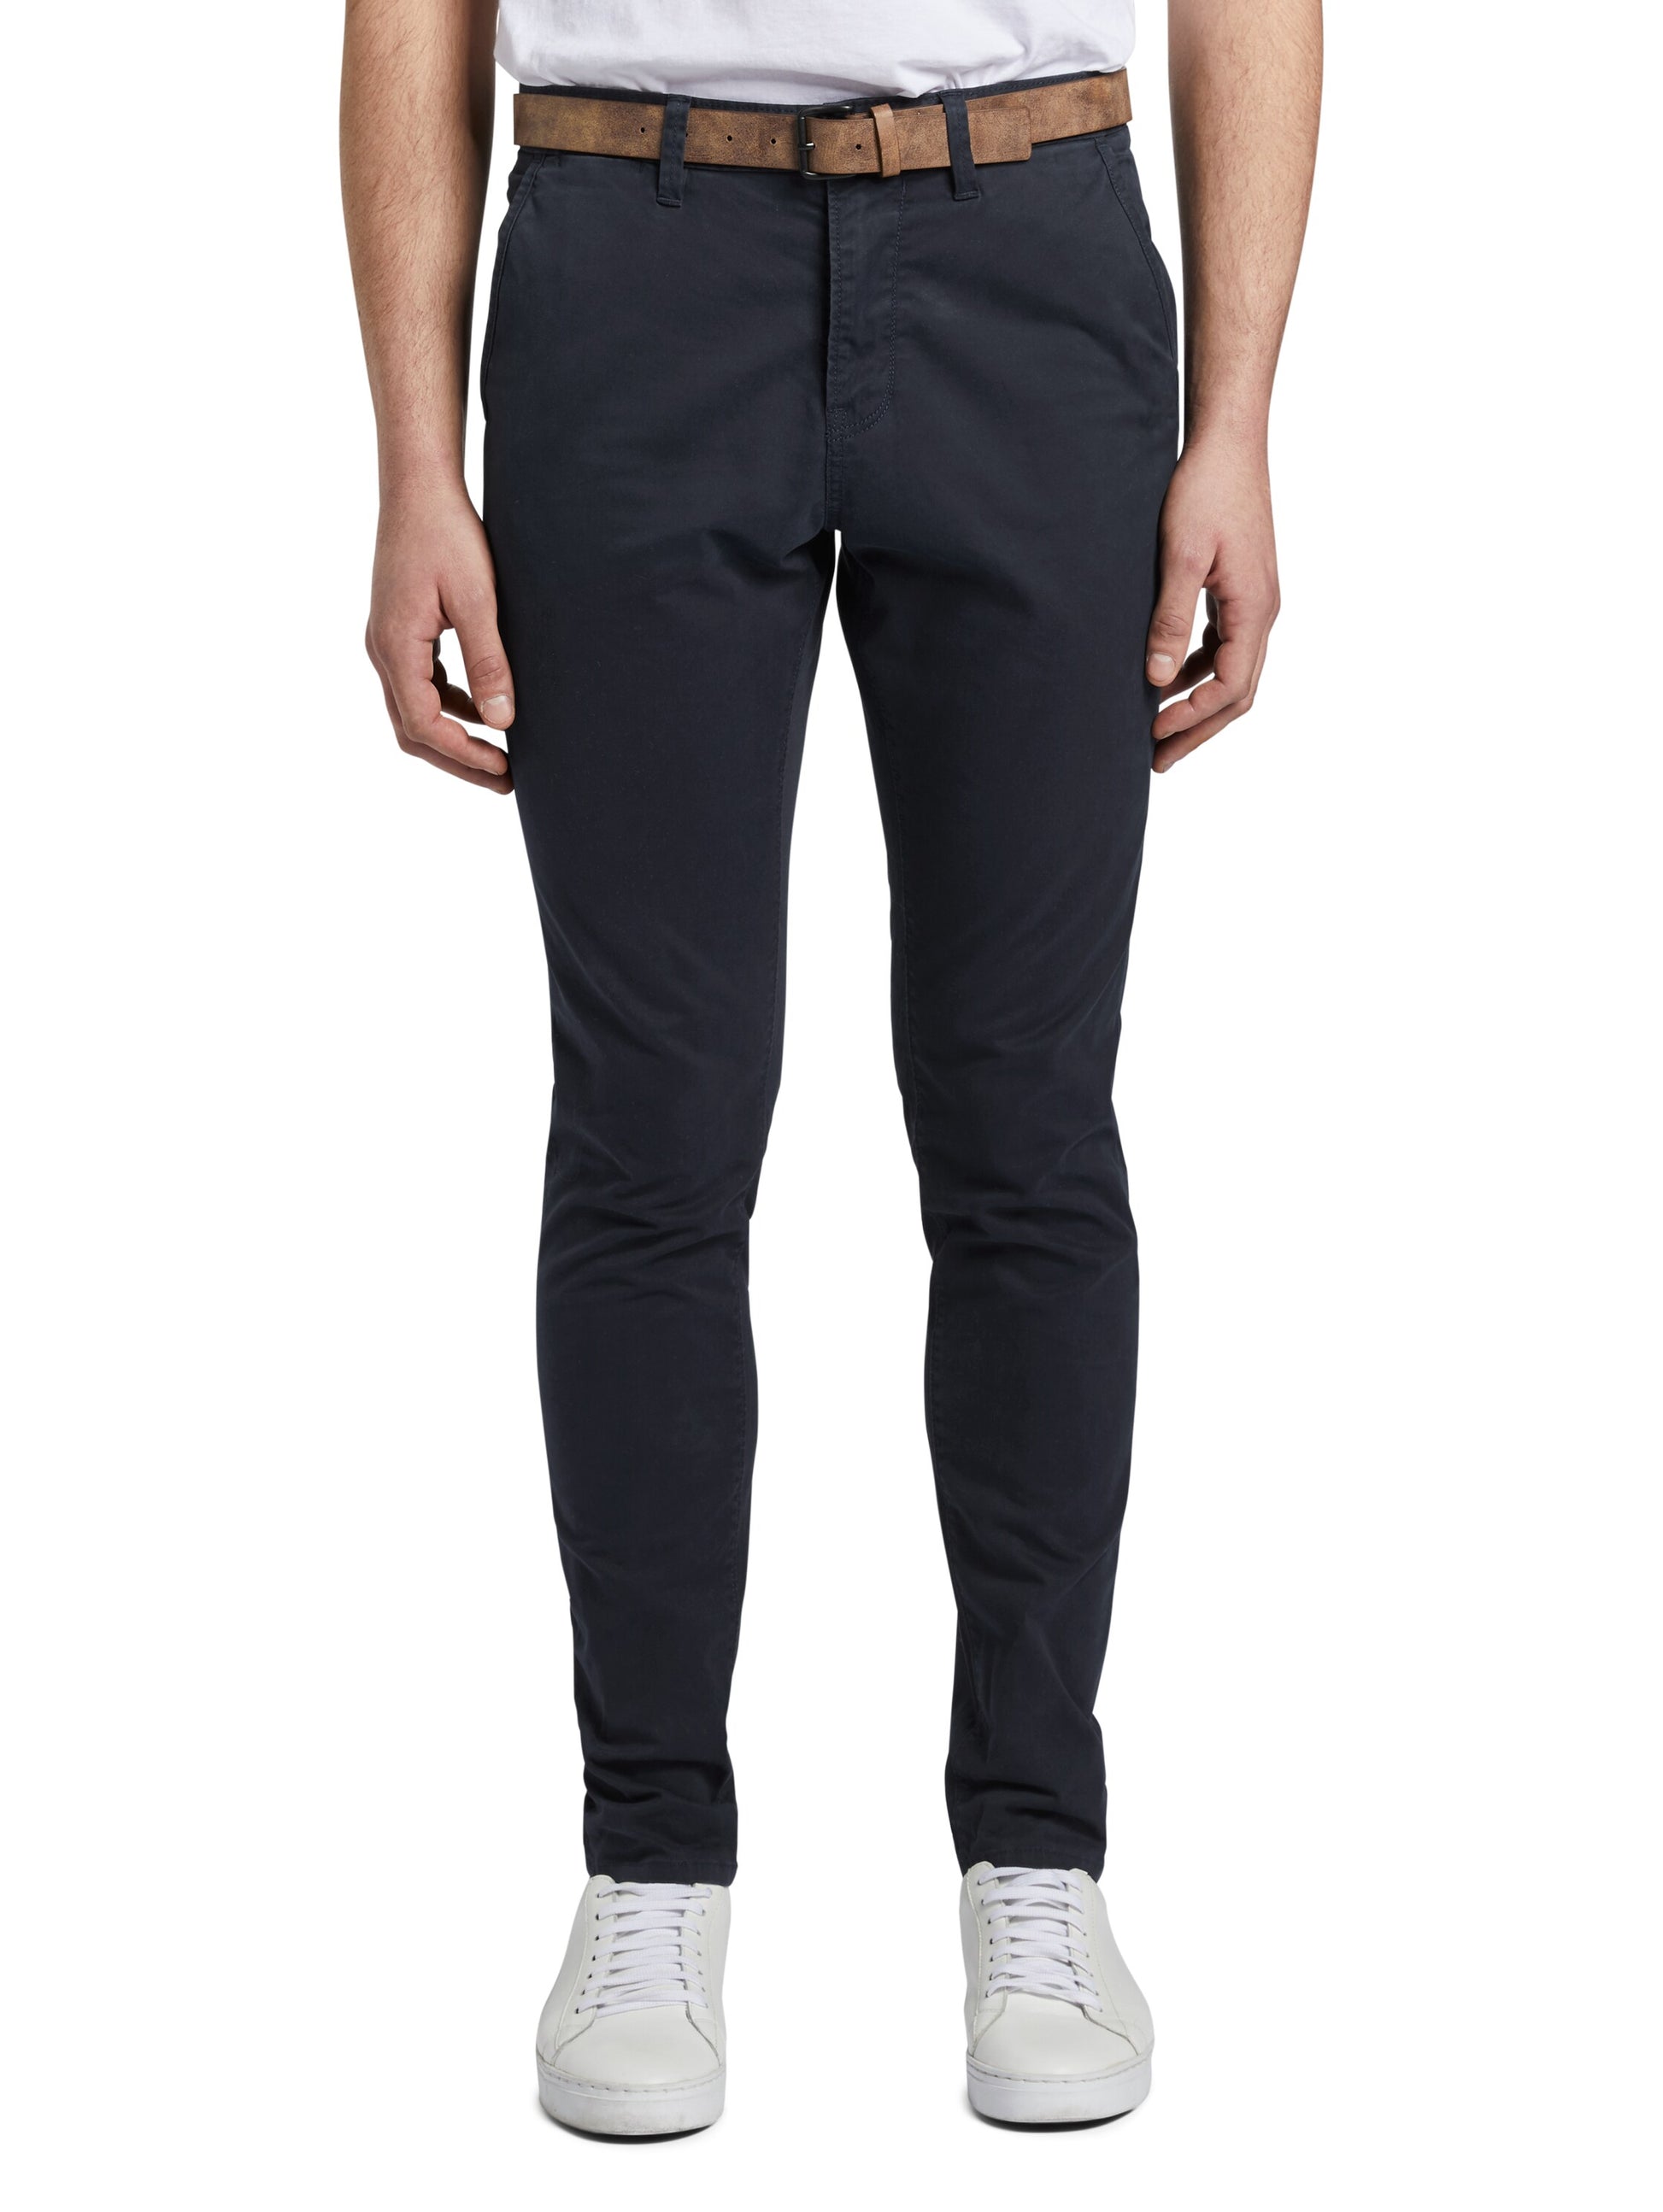 Slim Chino with belt (Sky Captain Bl)